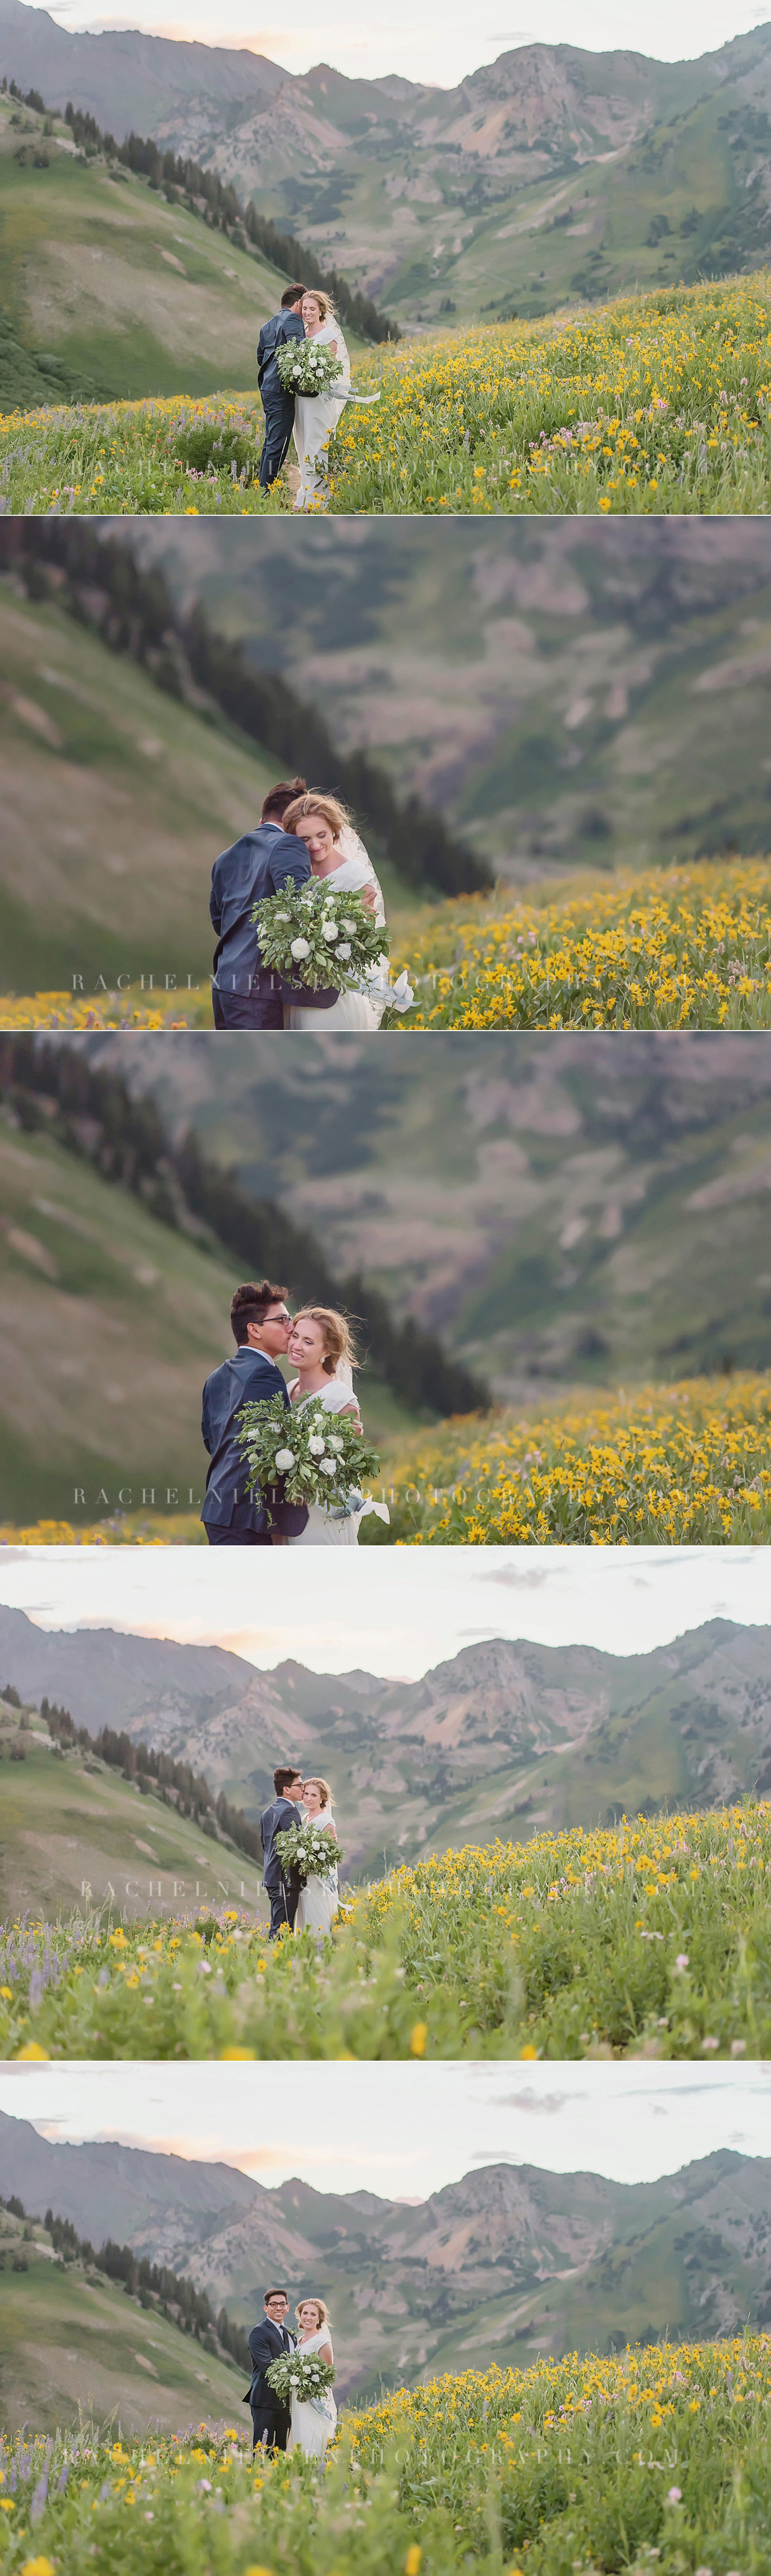 Albion-basin-bride-and-groom-17